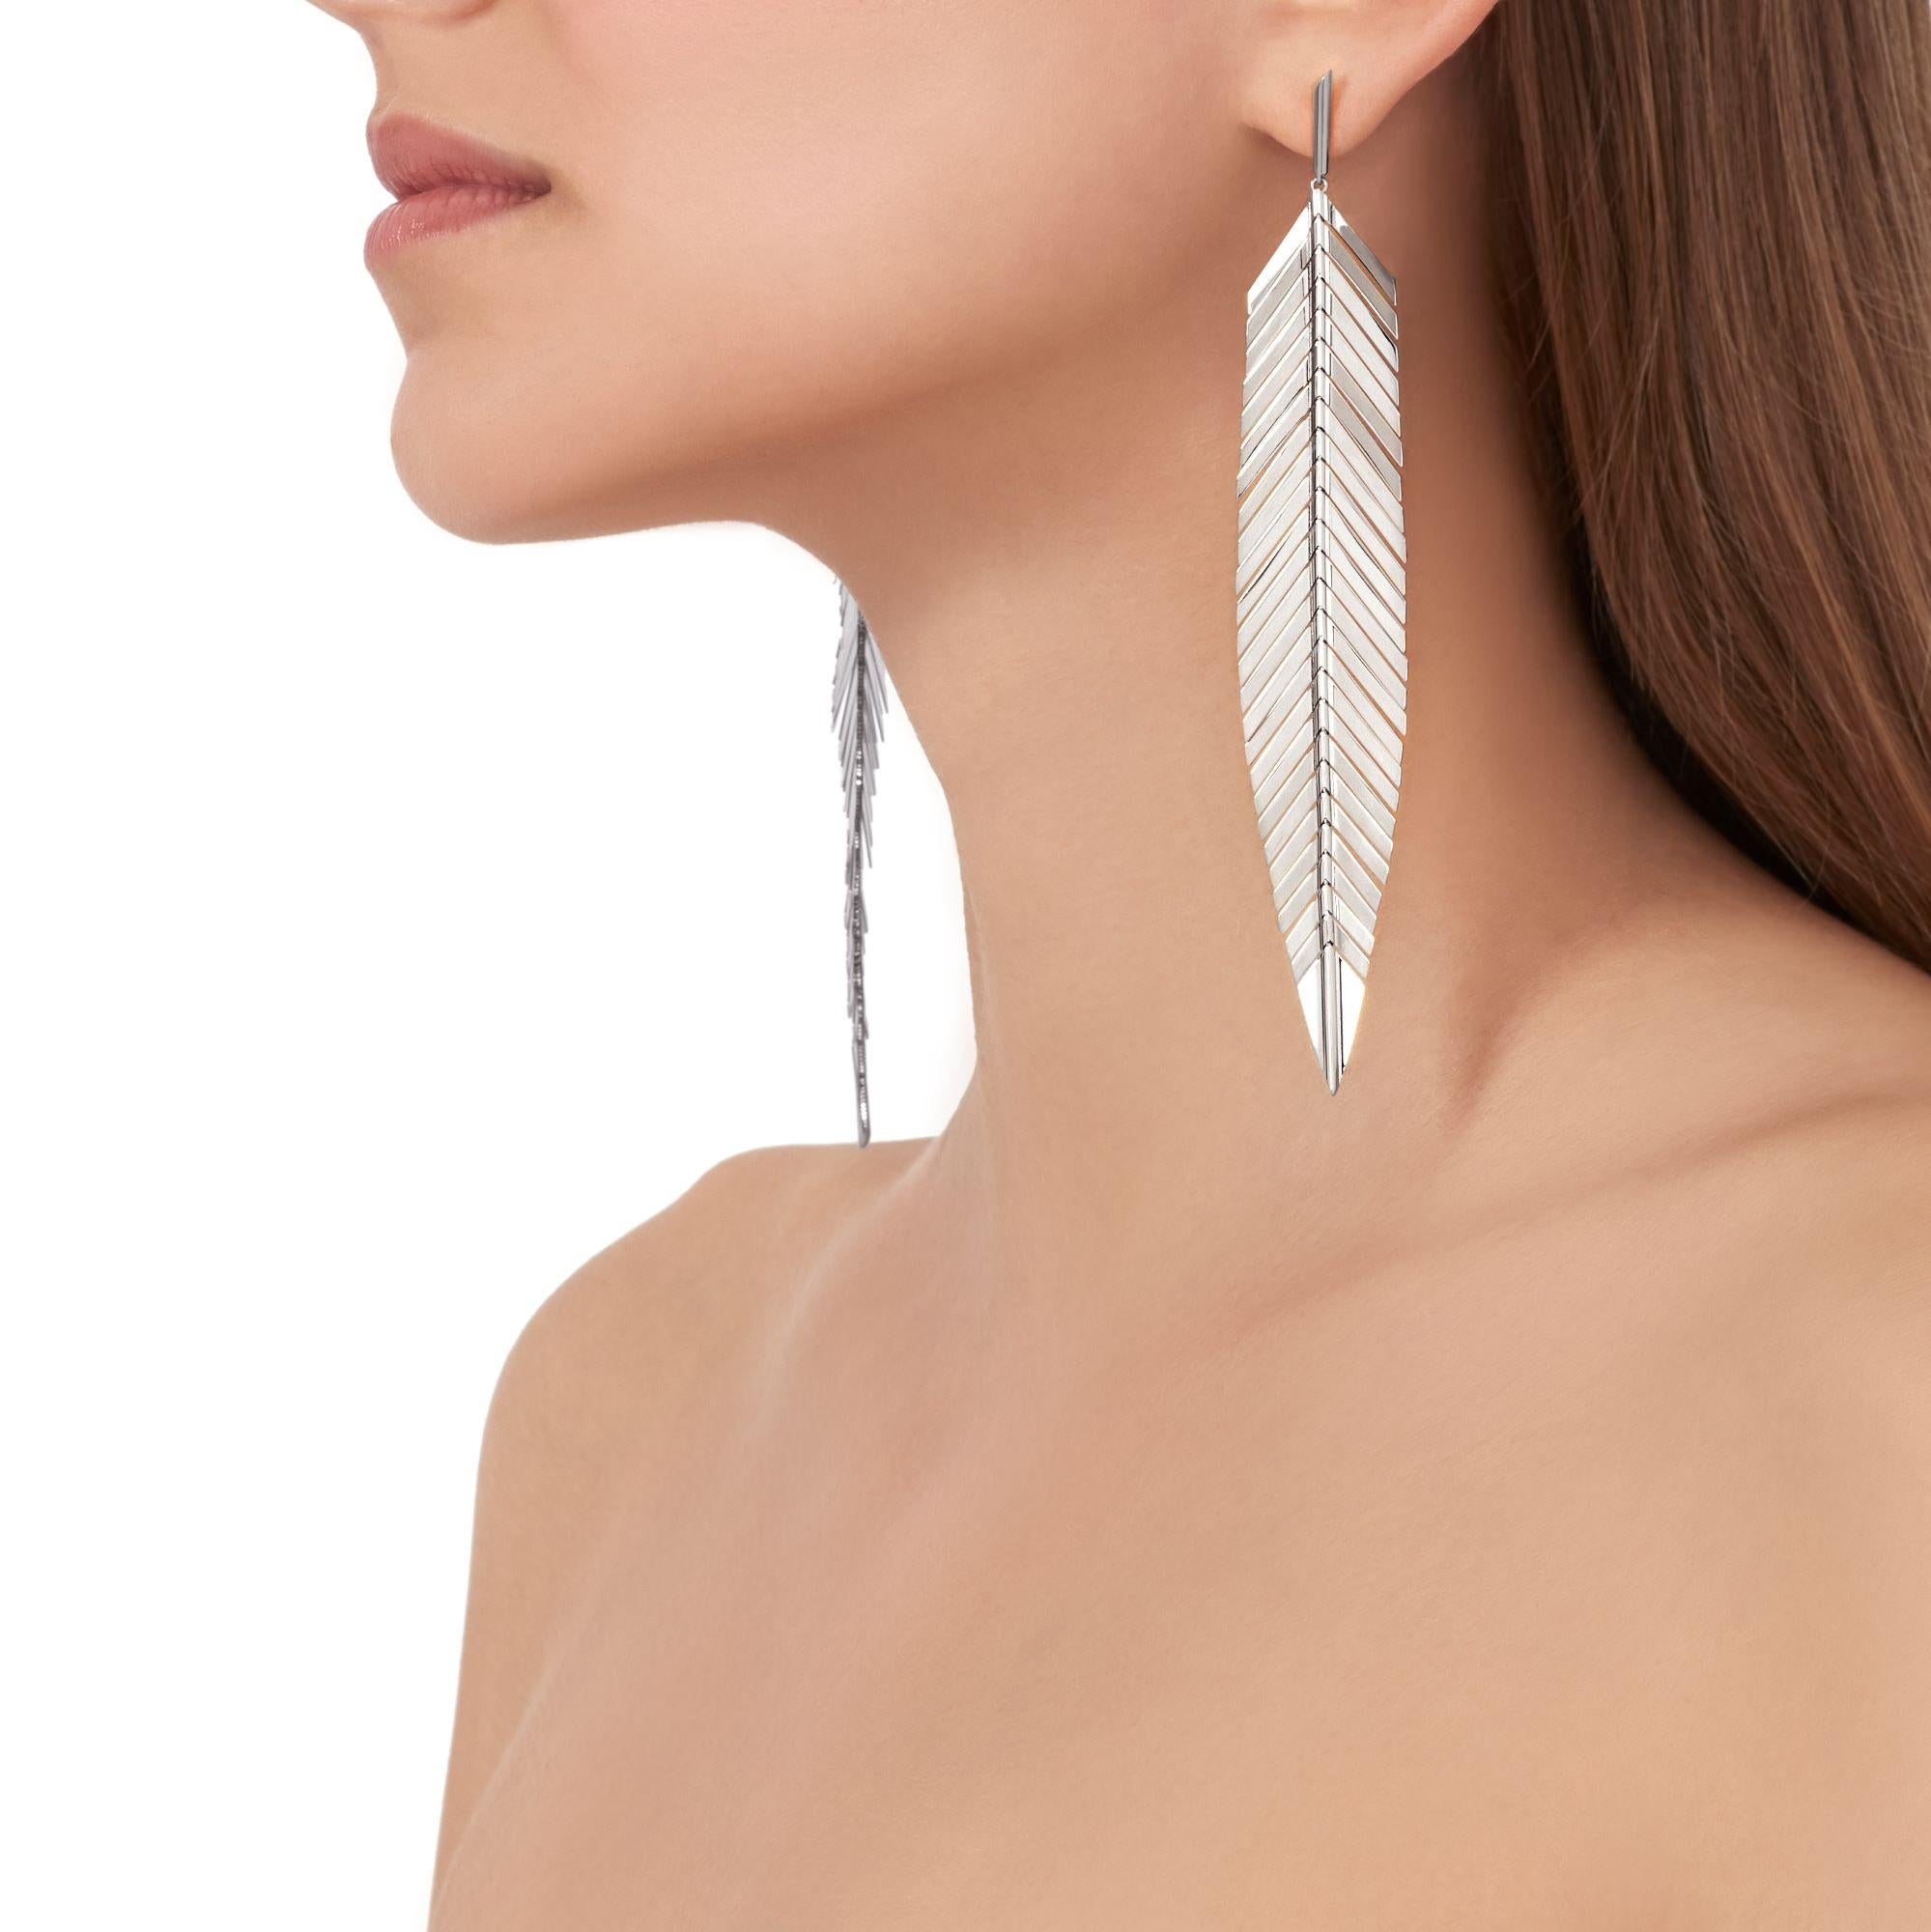 Contemporary Cadar Feather Drop Earrings, 18 Karat White Gold, Large